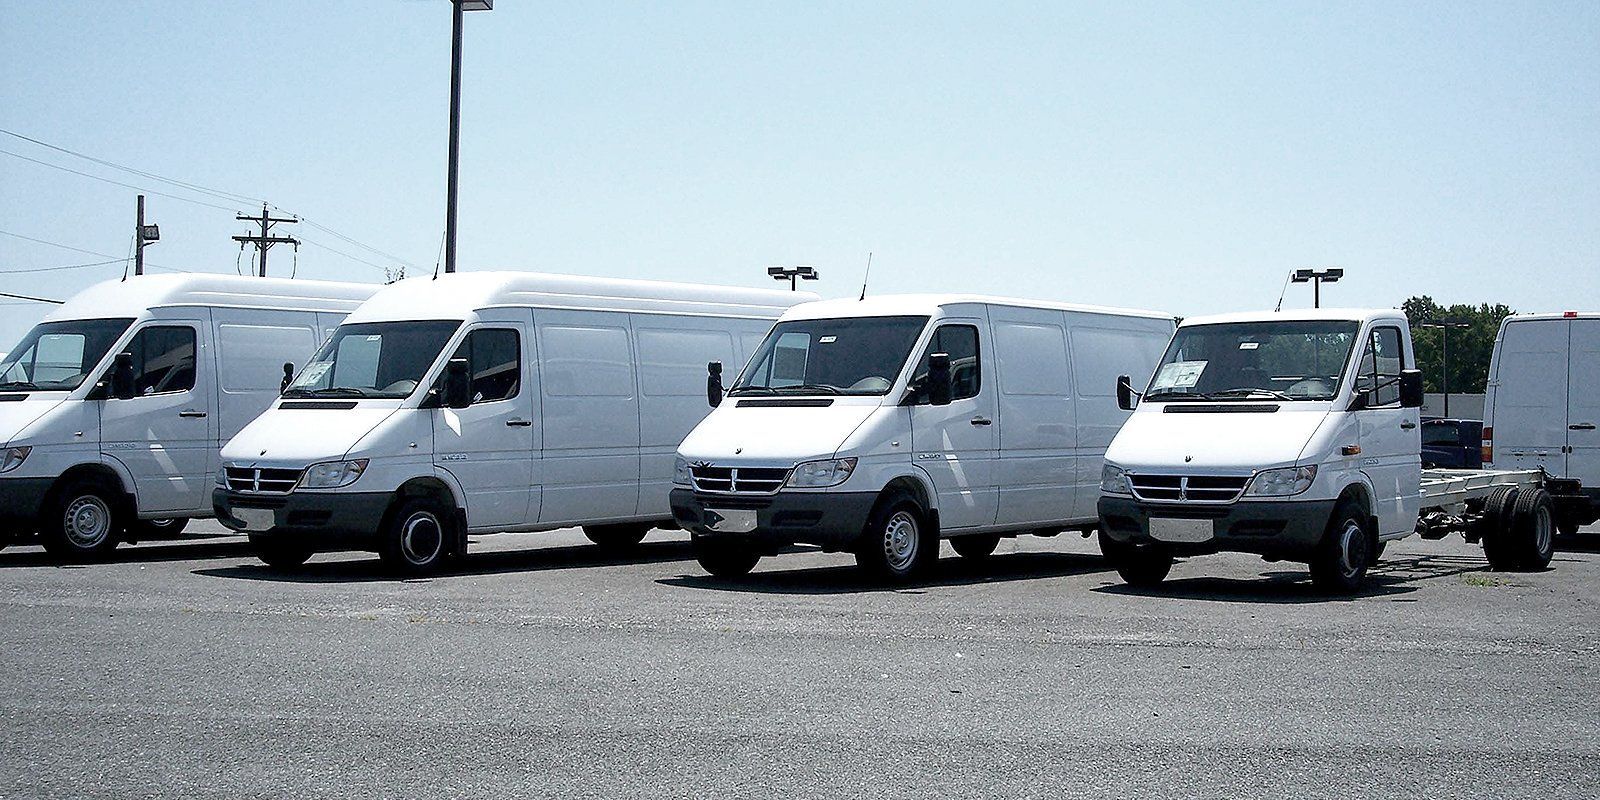 A row of white vans are parked in a gravel lot